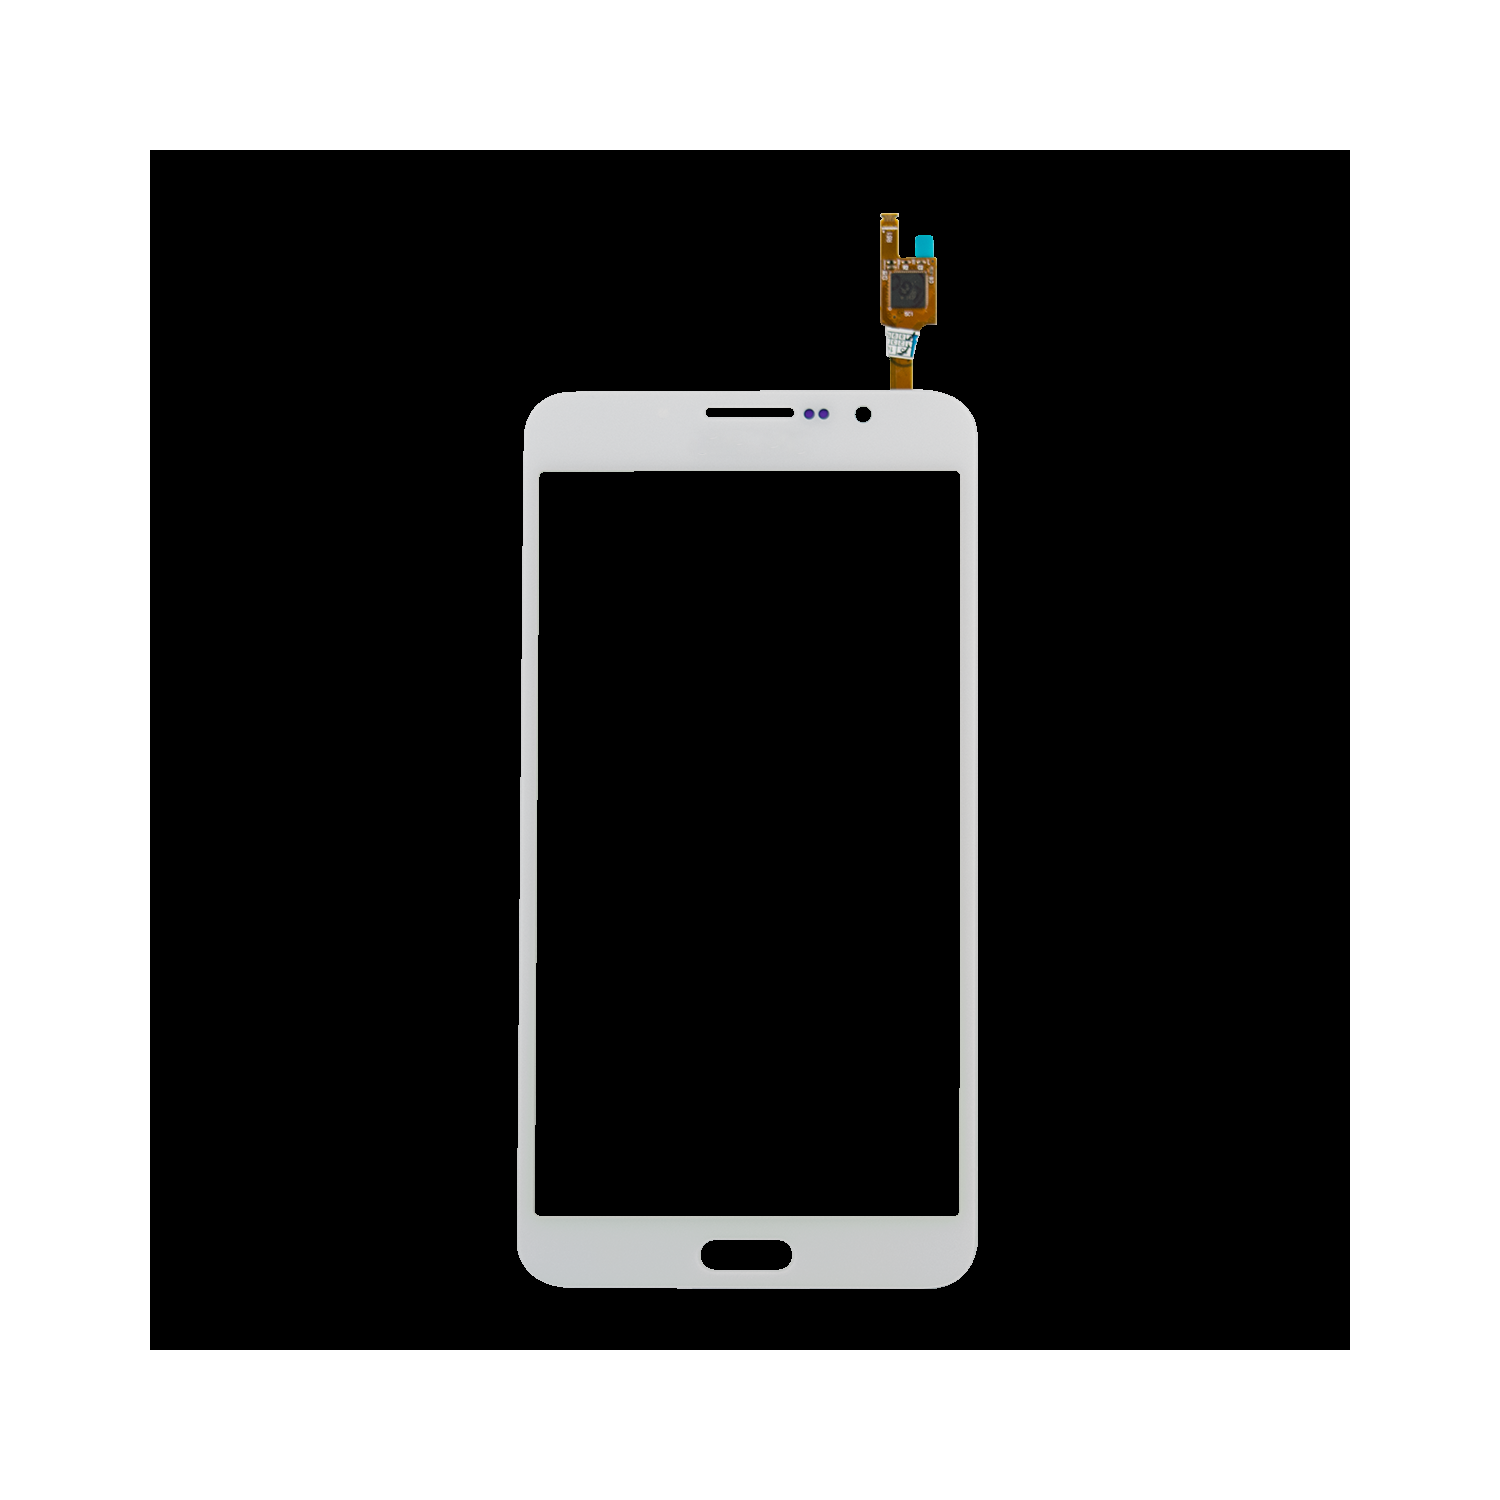 Replacement Digitizer Only Compatible For Samsung Galaxy Mega 2 (G750) - White